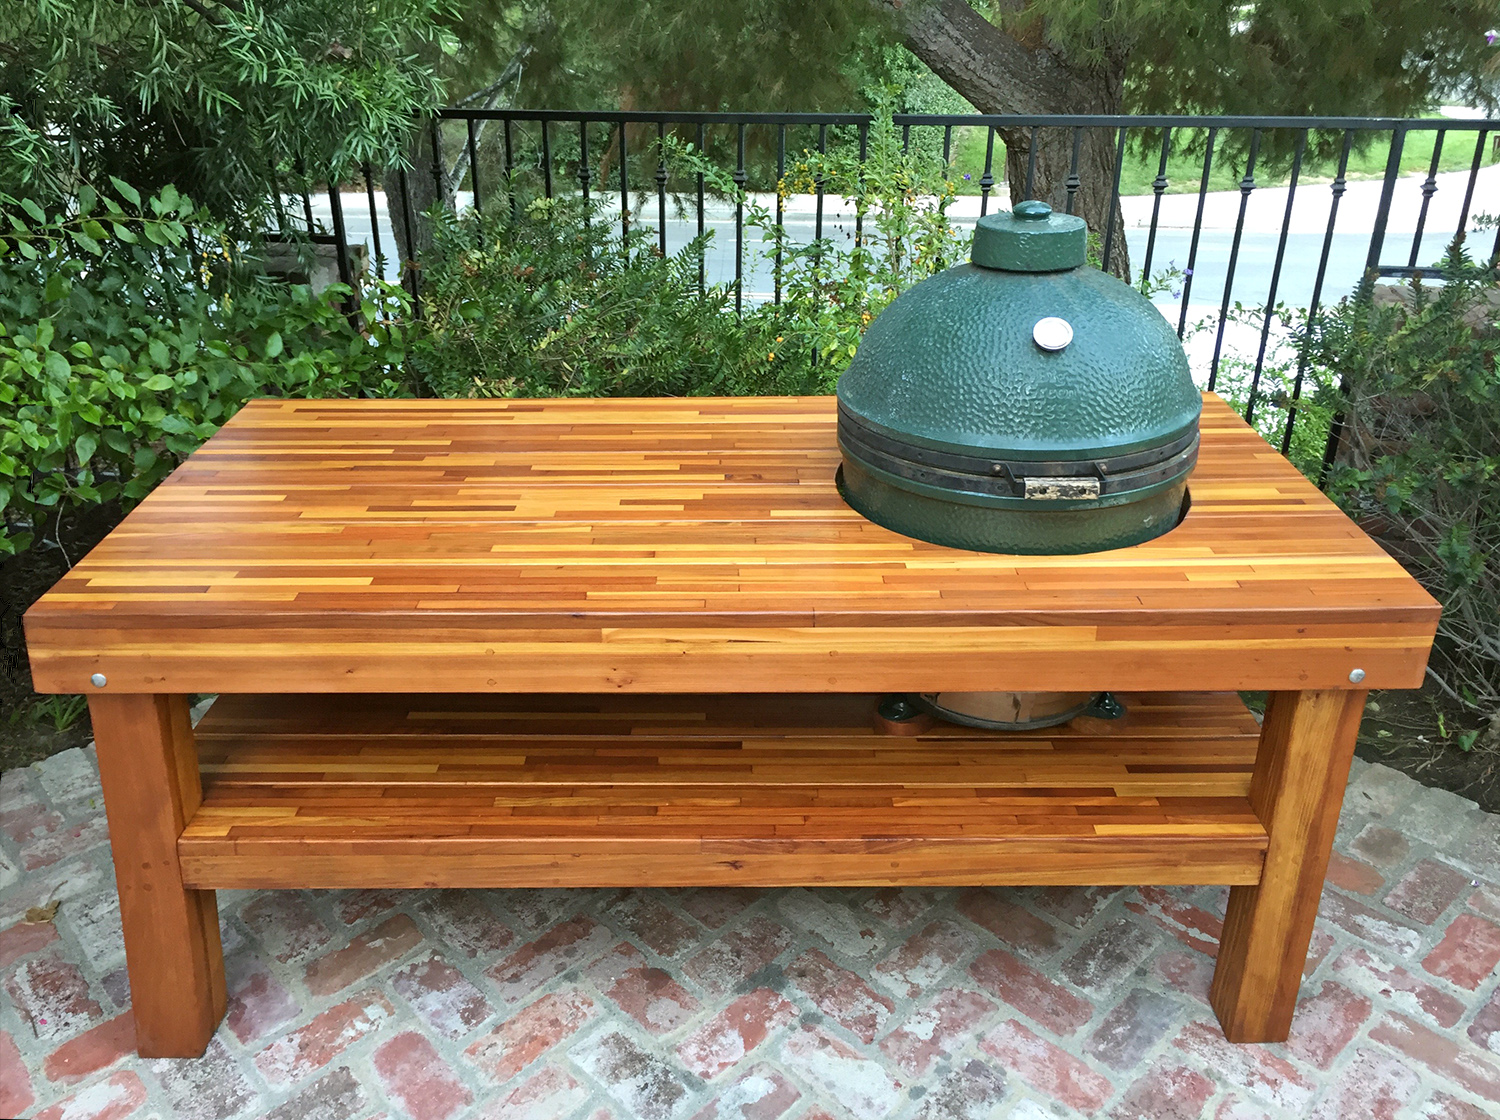 Outdoor Grill Table Fusion Medium Wood and Gas For 8 Persons